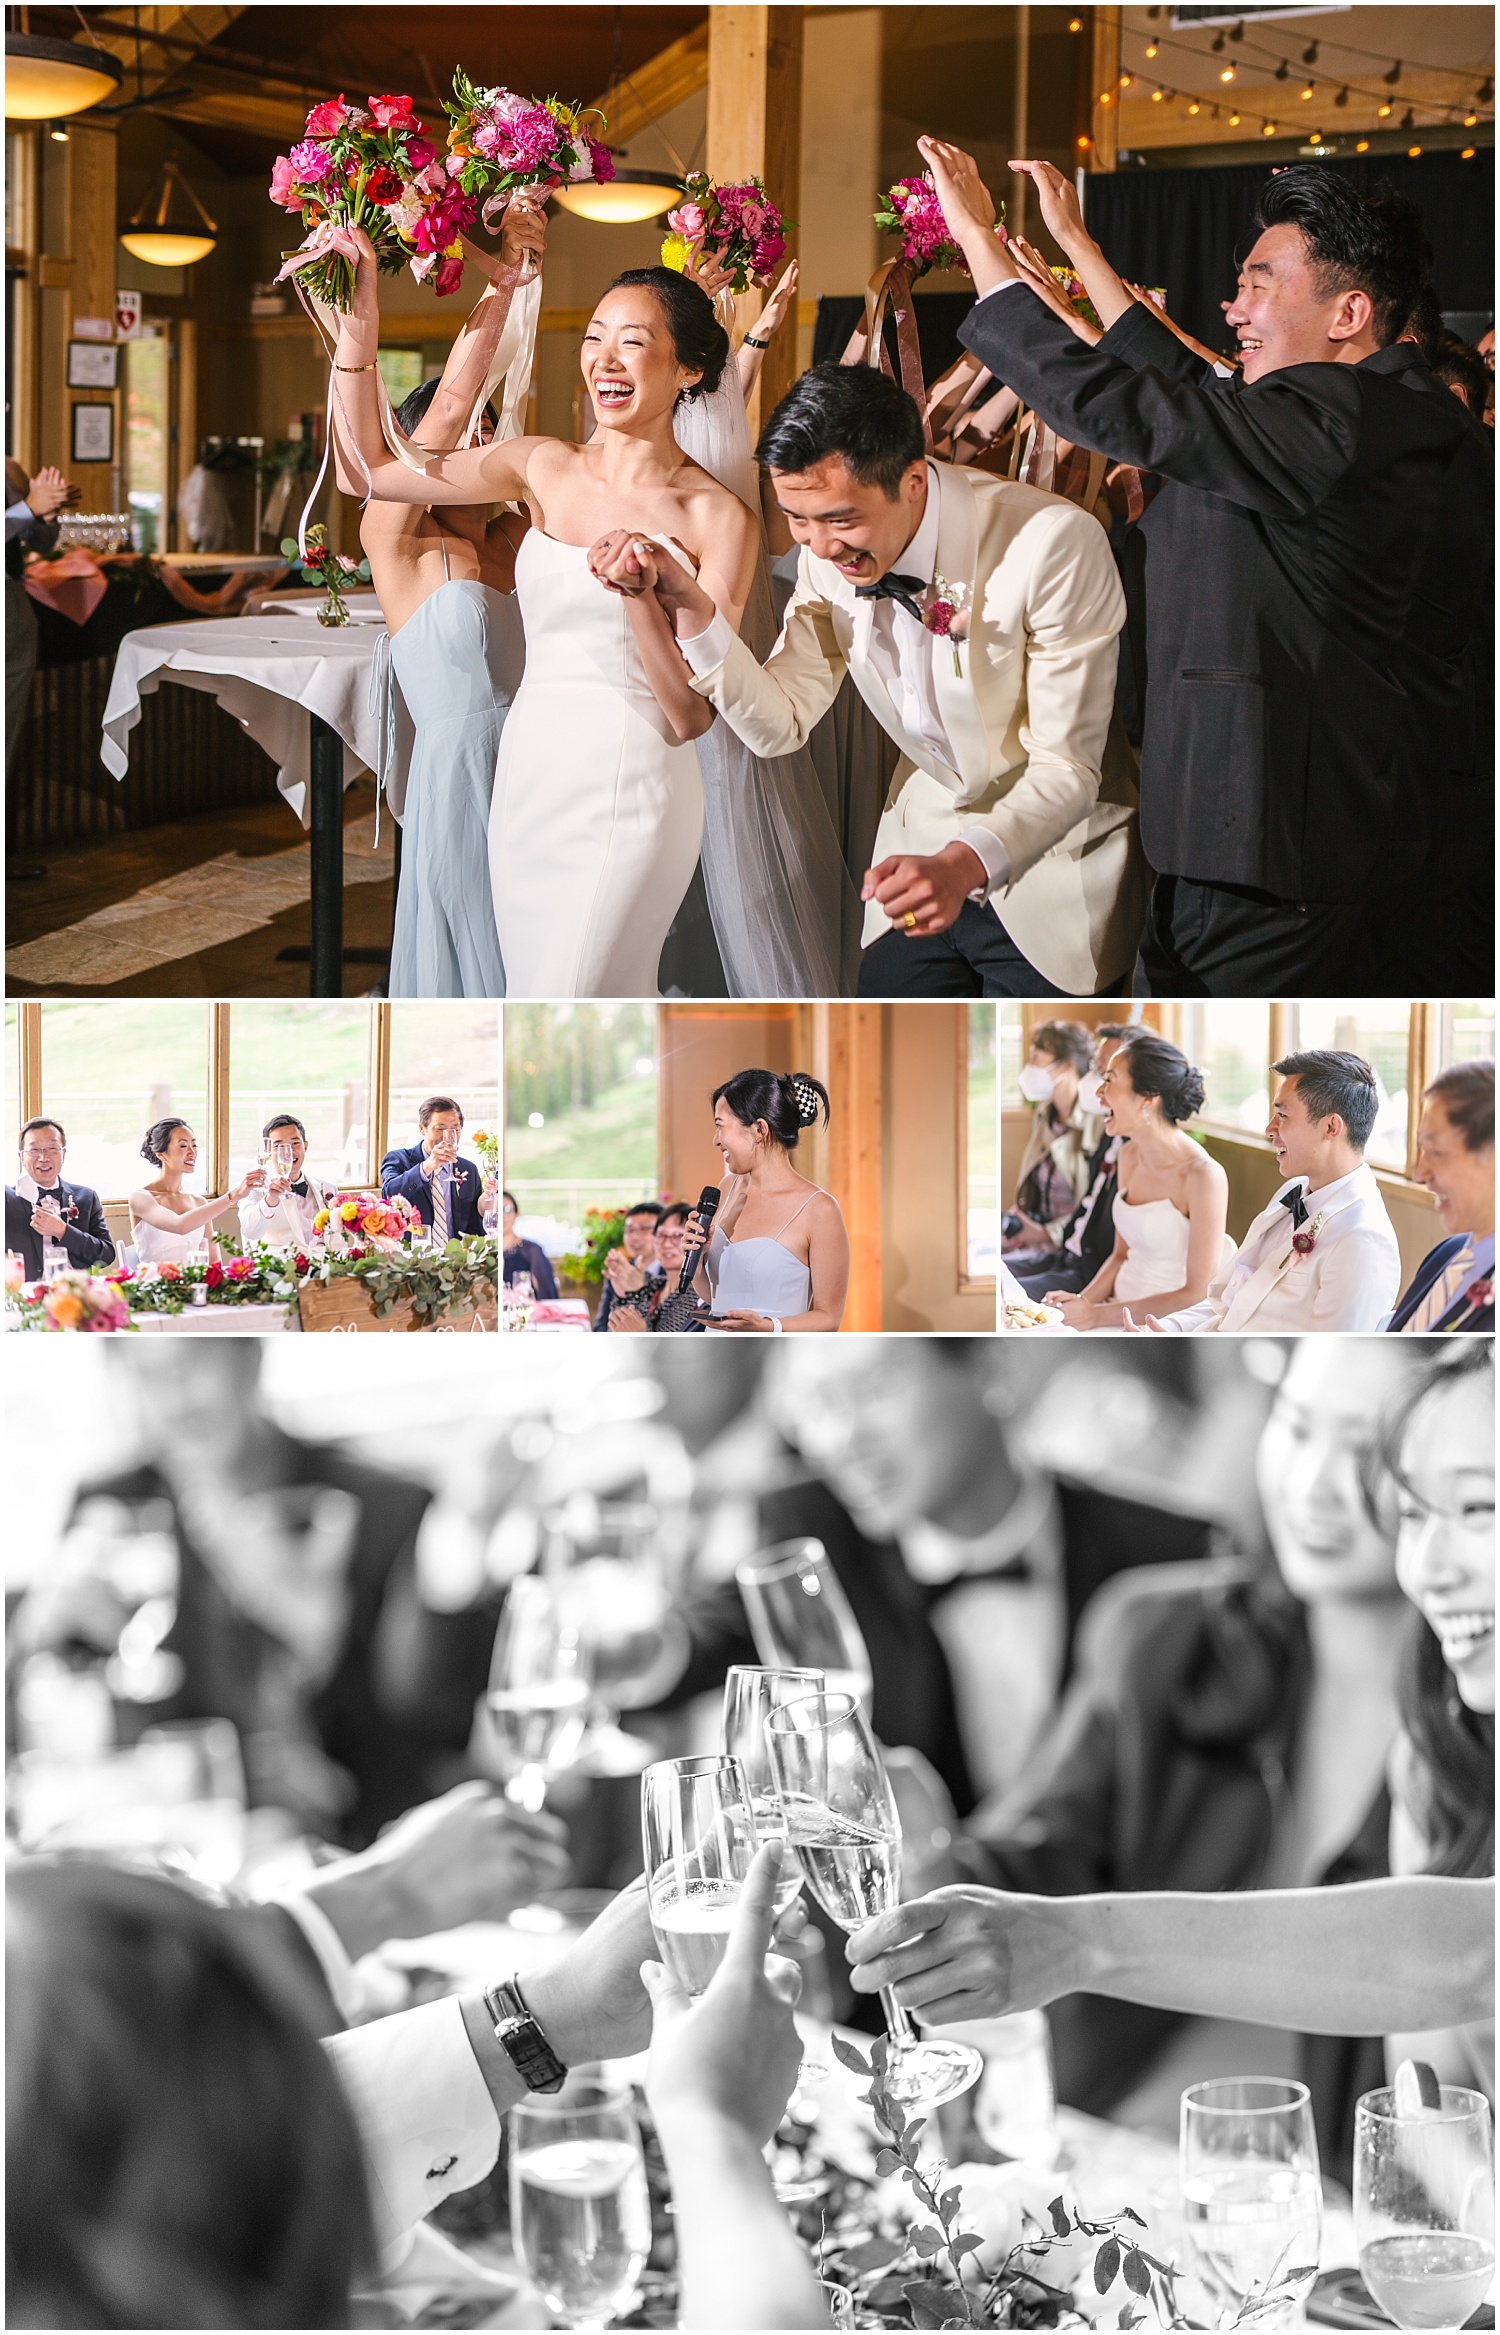 toasts to the bride and groom at Black Mountain Lodge wedding reception at Arapahoe Basin Colorado